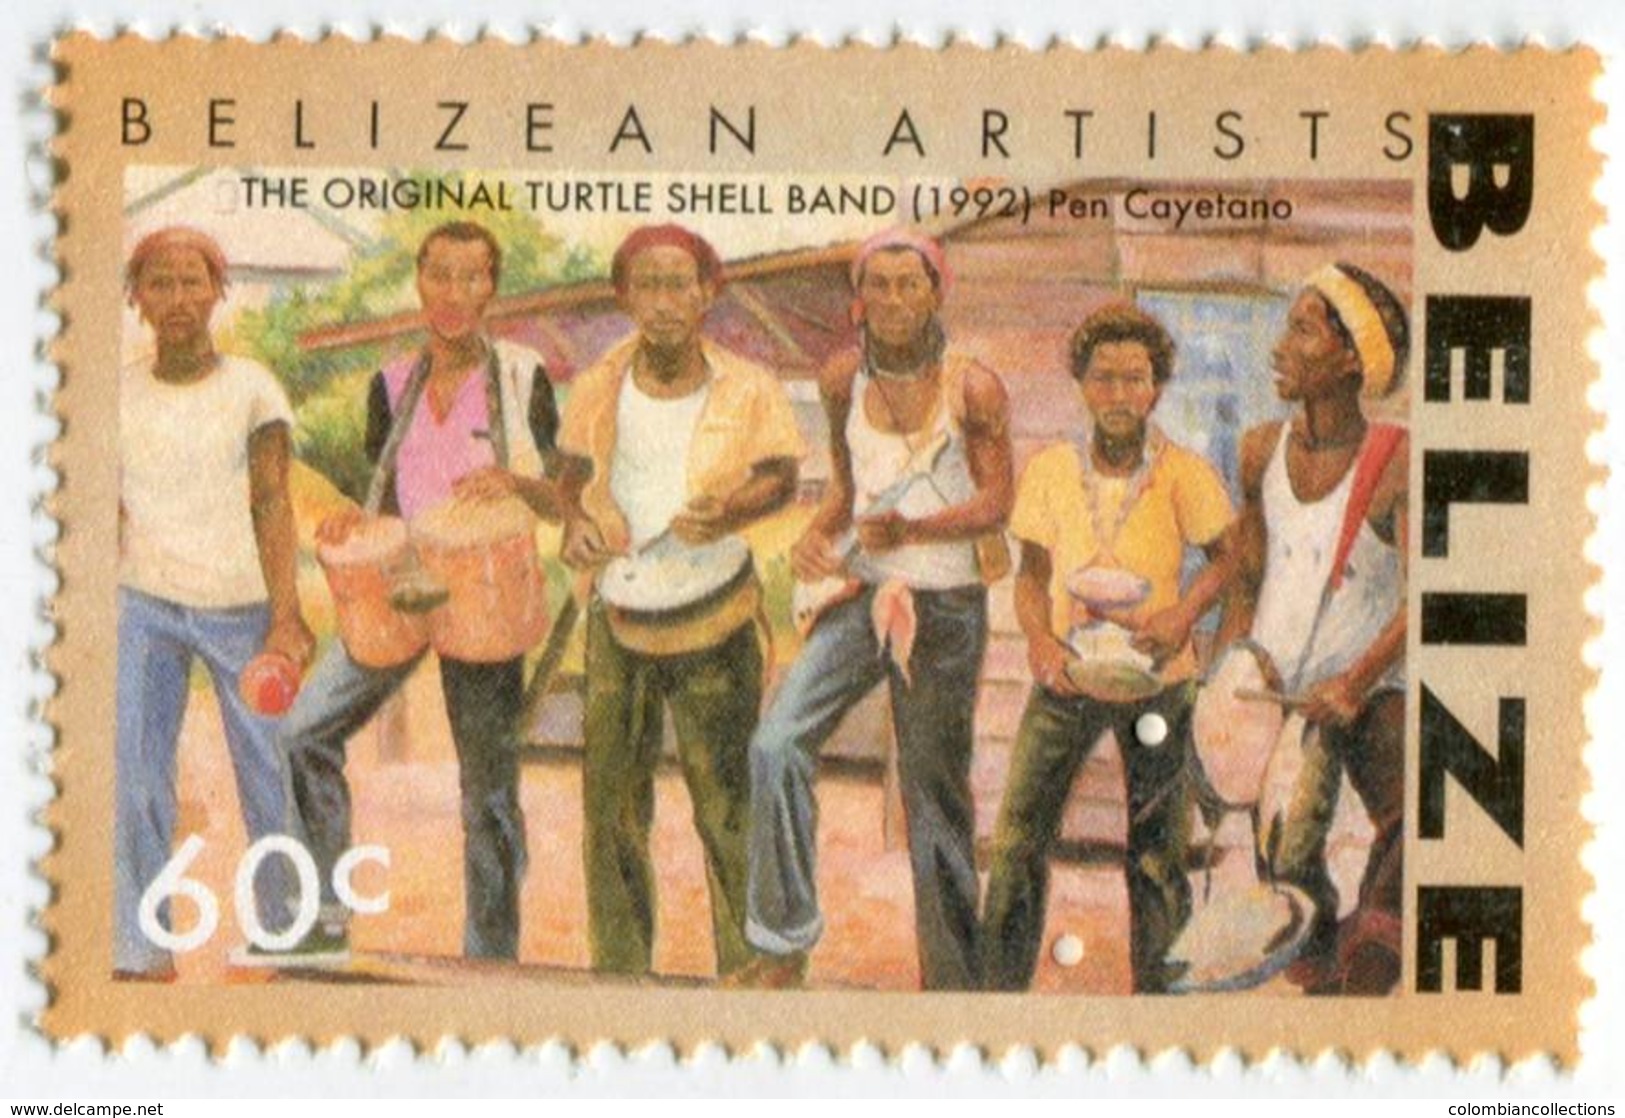 Lote Be6, Belize, 2007, Sello, Stamp, 6 V, Belizean Artists, Art, Music, Flag, Water Fall, Woman - Belice (1973-...)